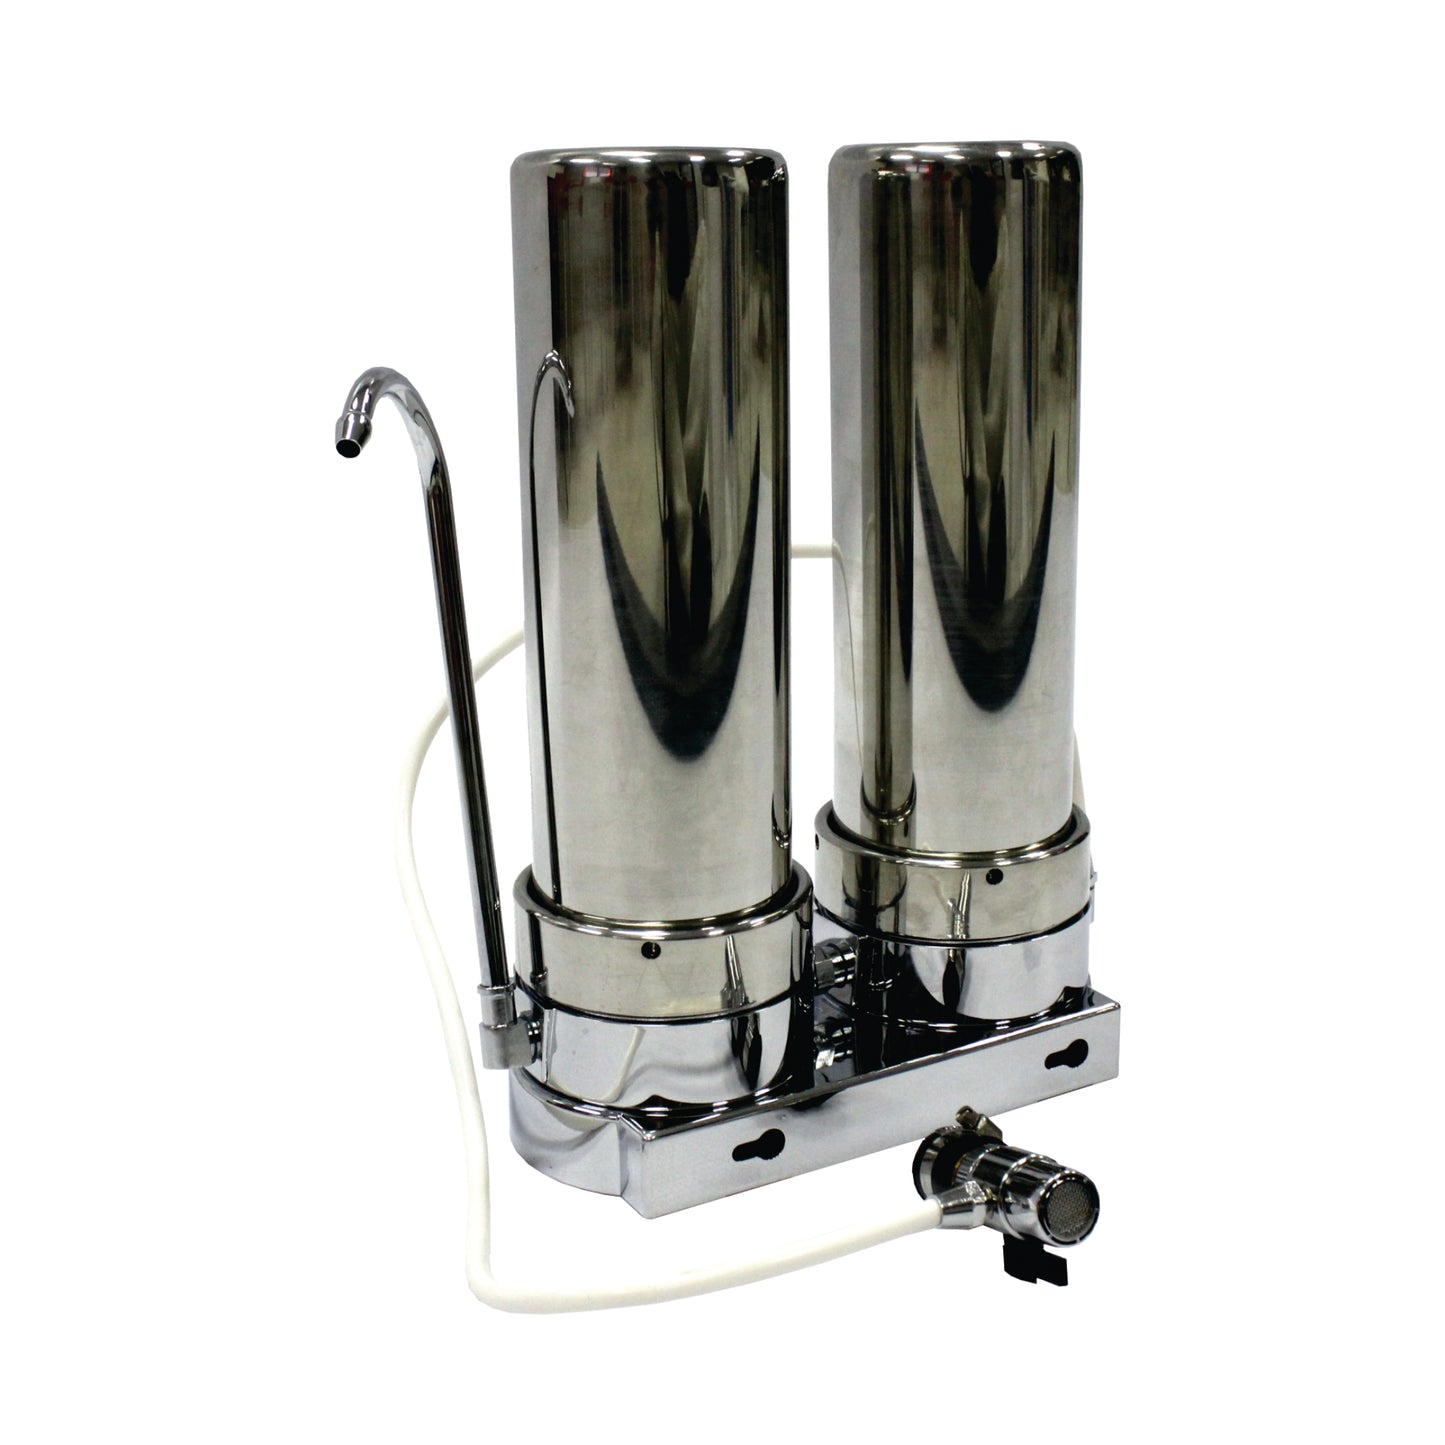 Water Filtration - Counter top Filter - Double